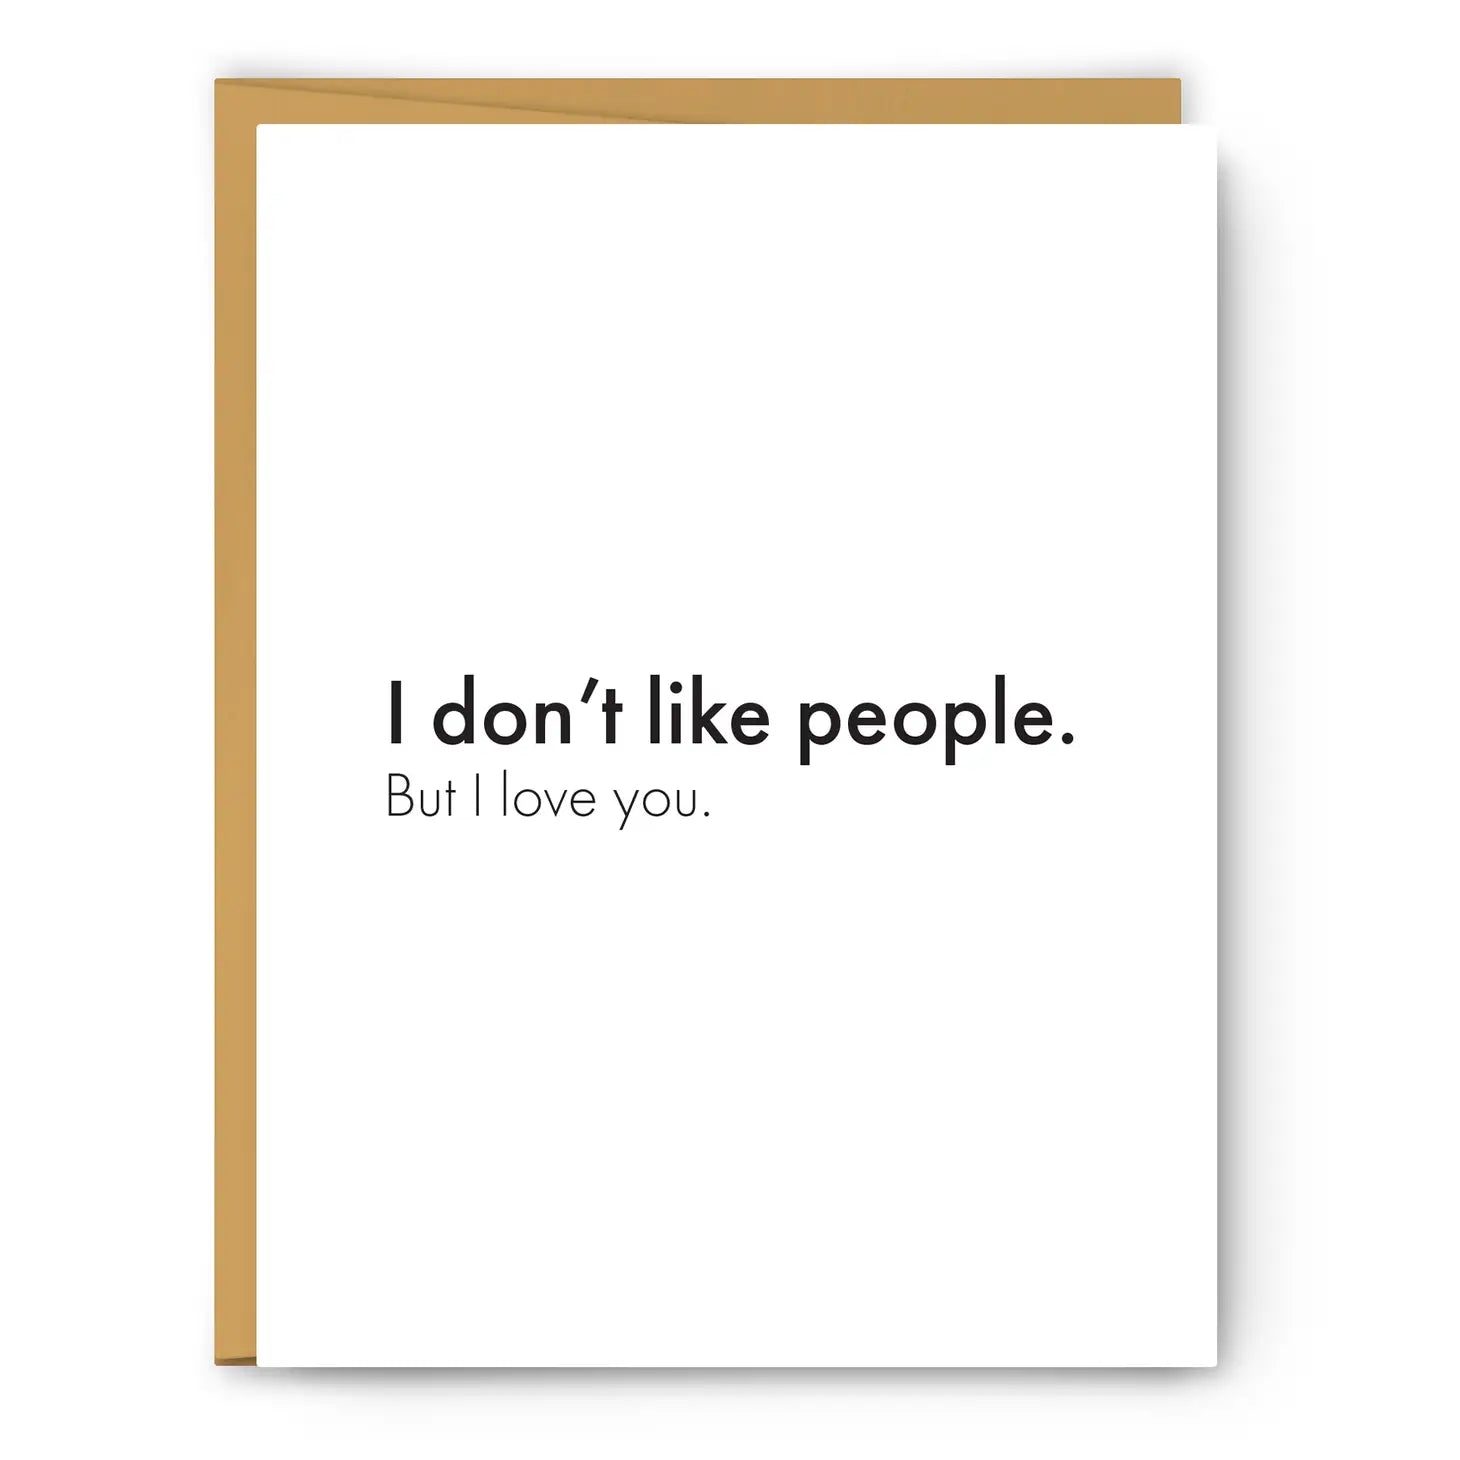 Don't like people- Greeting Card